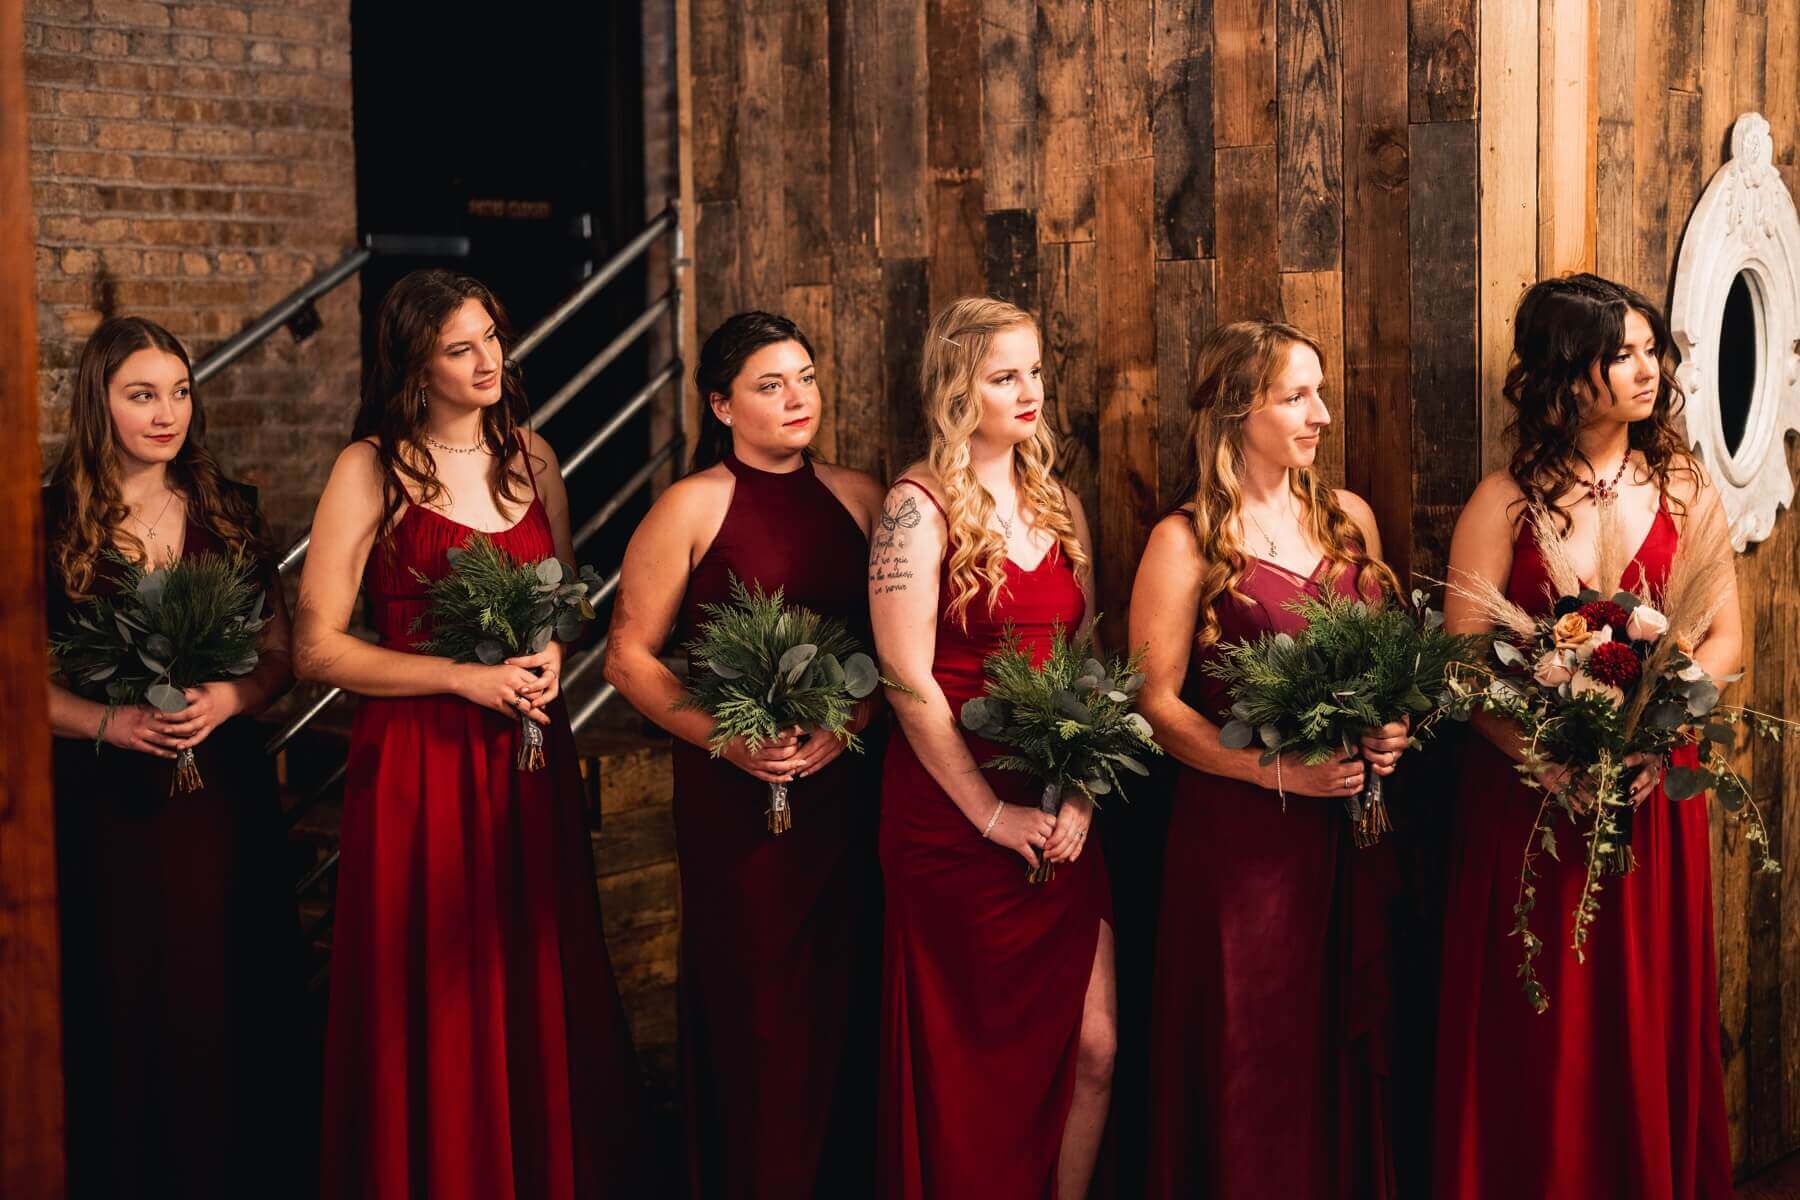 Bridesmaids wearing dresses in shades of crimson